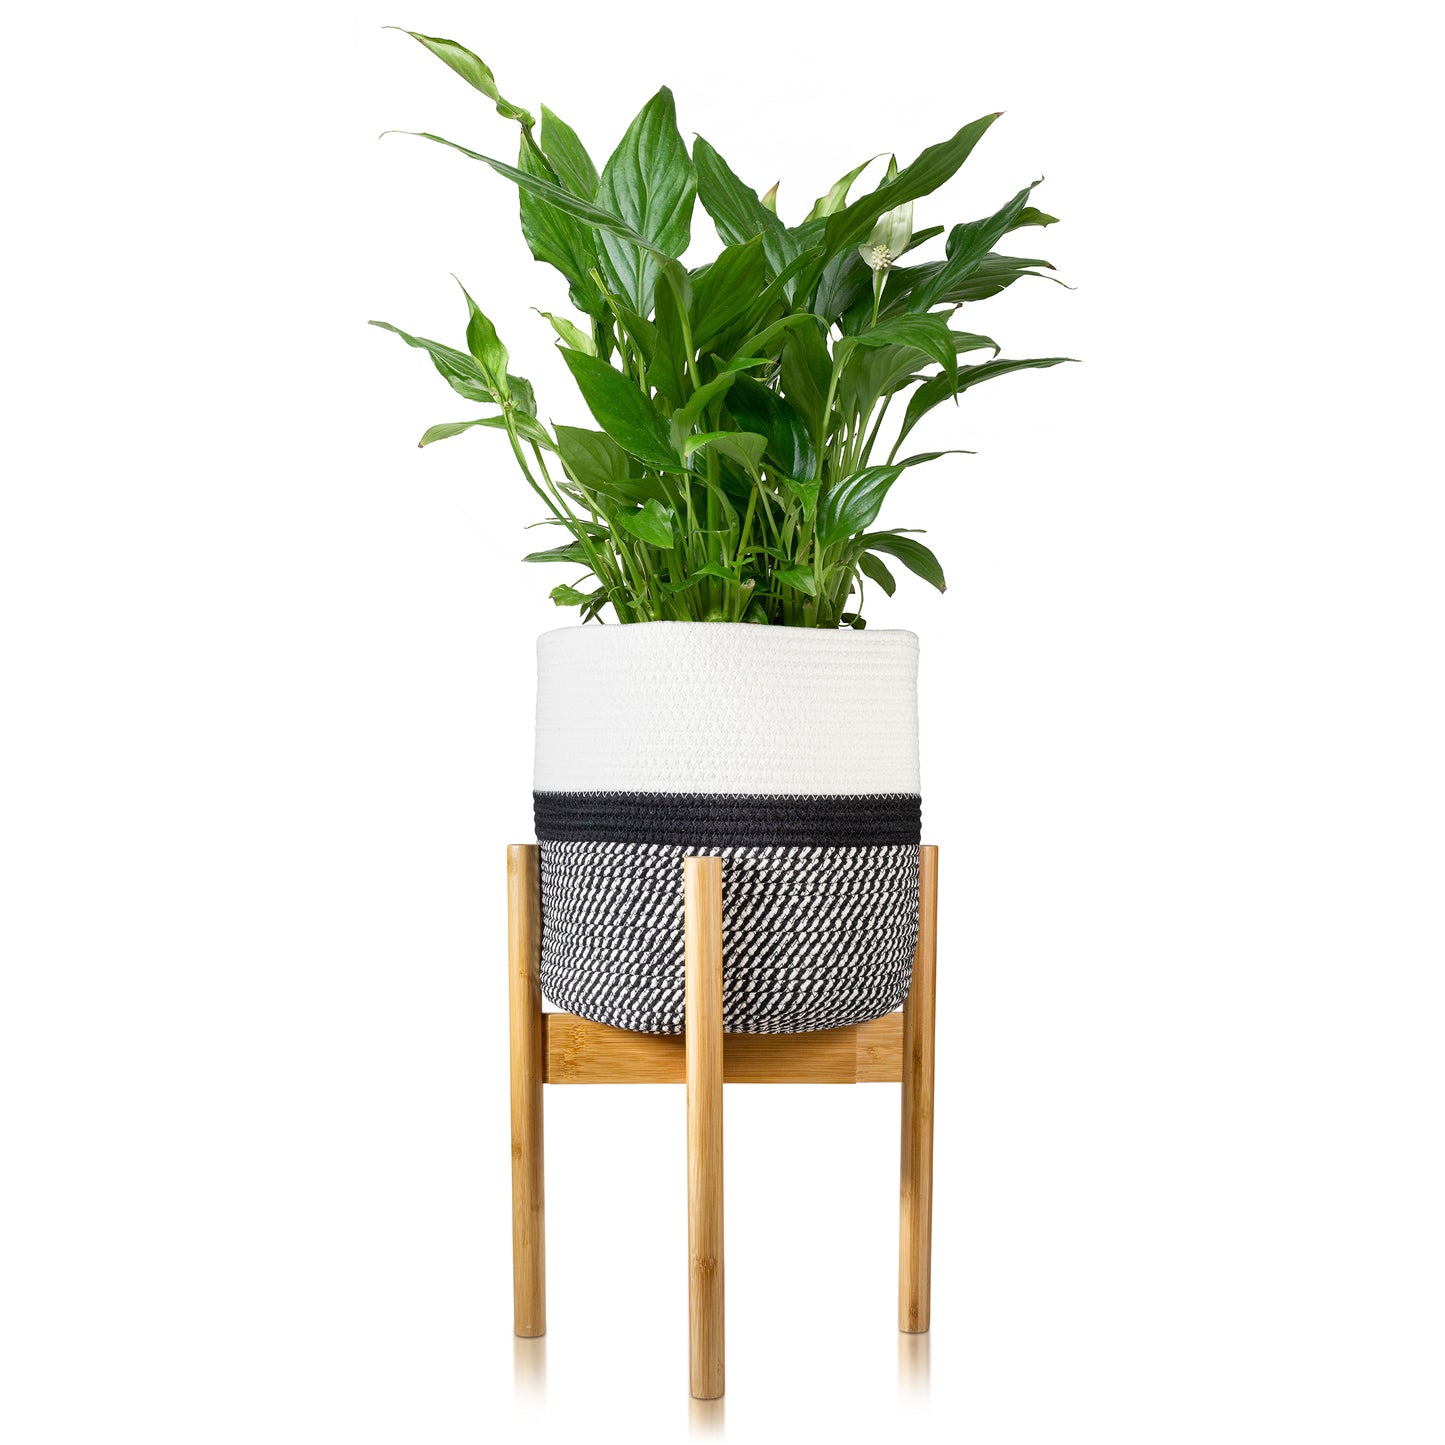 Our indoor plant stands are handcrafted from high quality wood (Bamboo and Acacia), and are very durable and stury, while are cotton baskets planter are made from 100% recycled cotton rope and sewn in coiling method which makes them sturdy but soft.